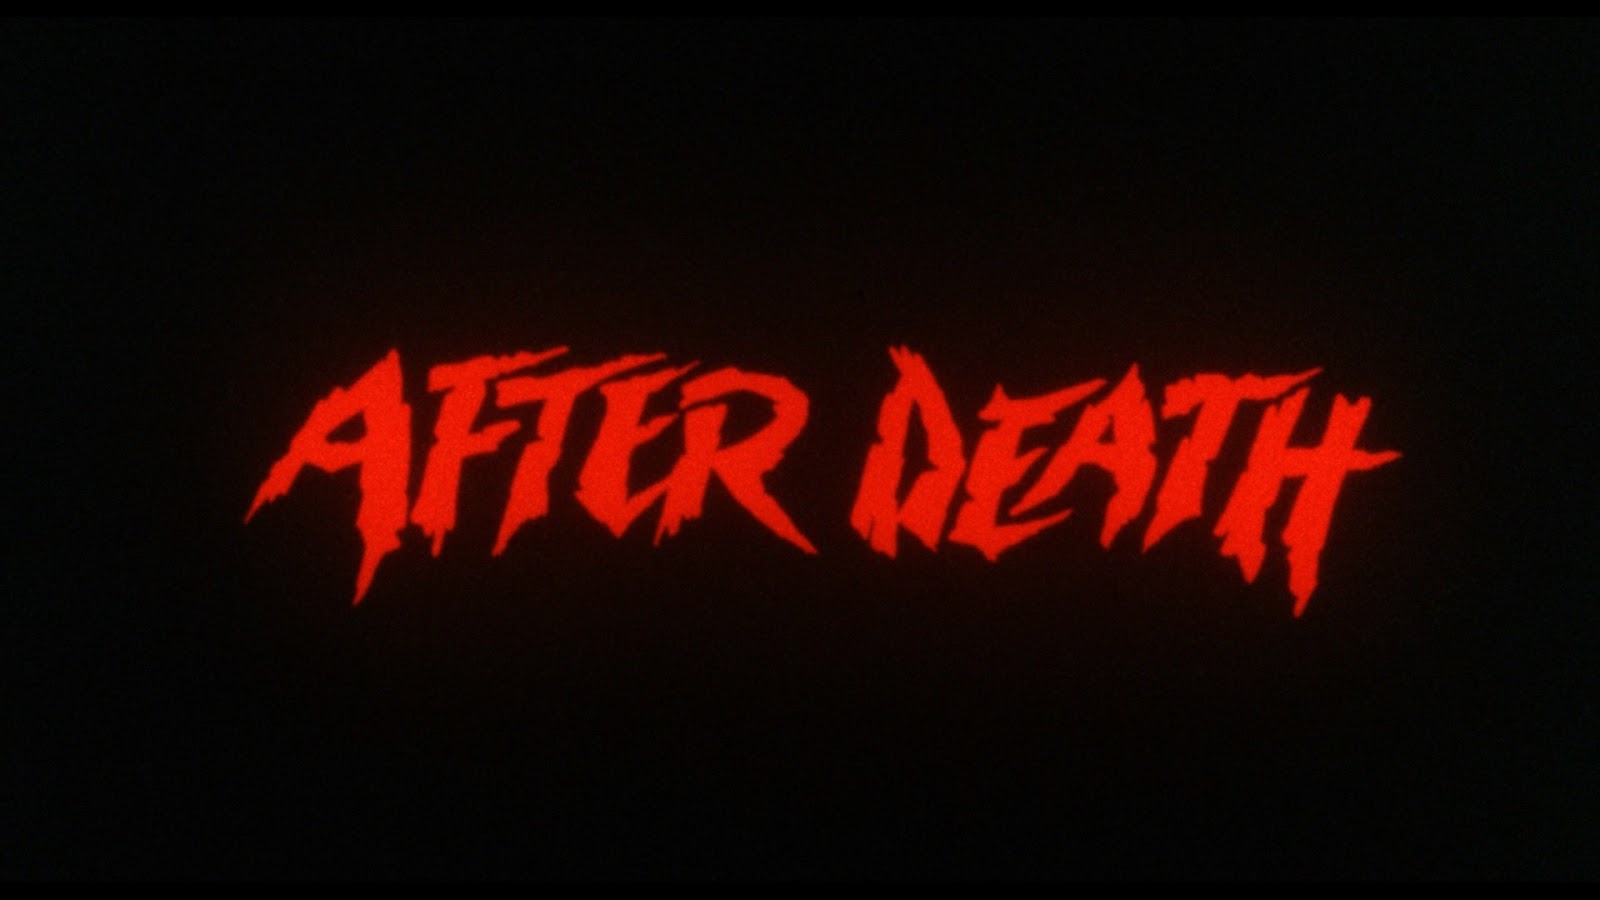 Zombie 4: After Death (1989) - Filmaffinity